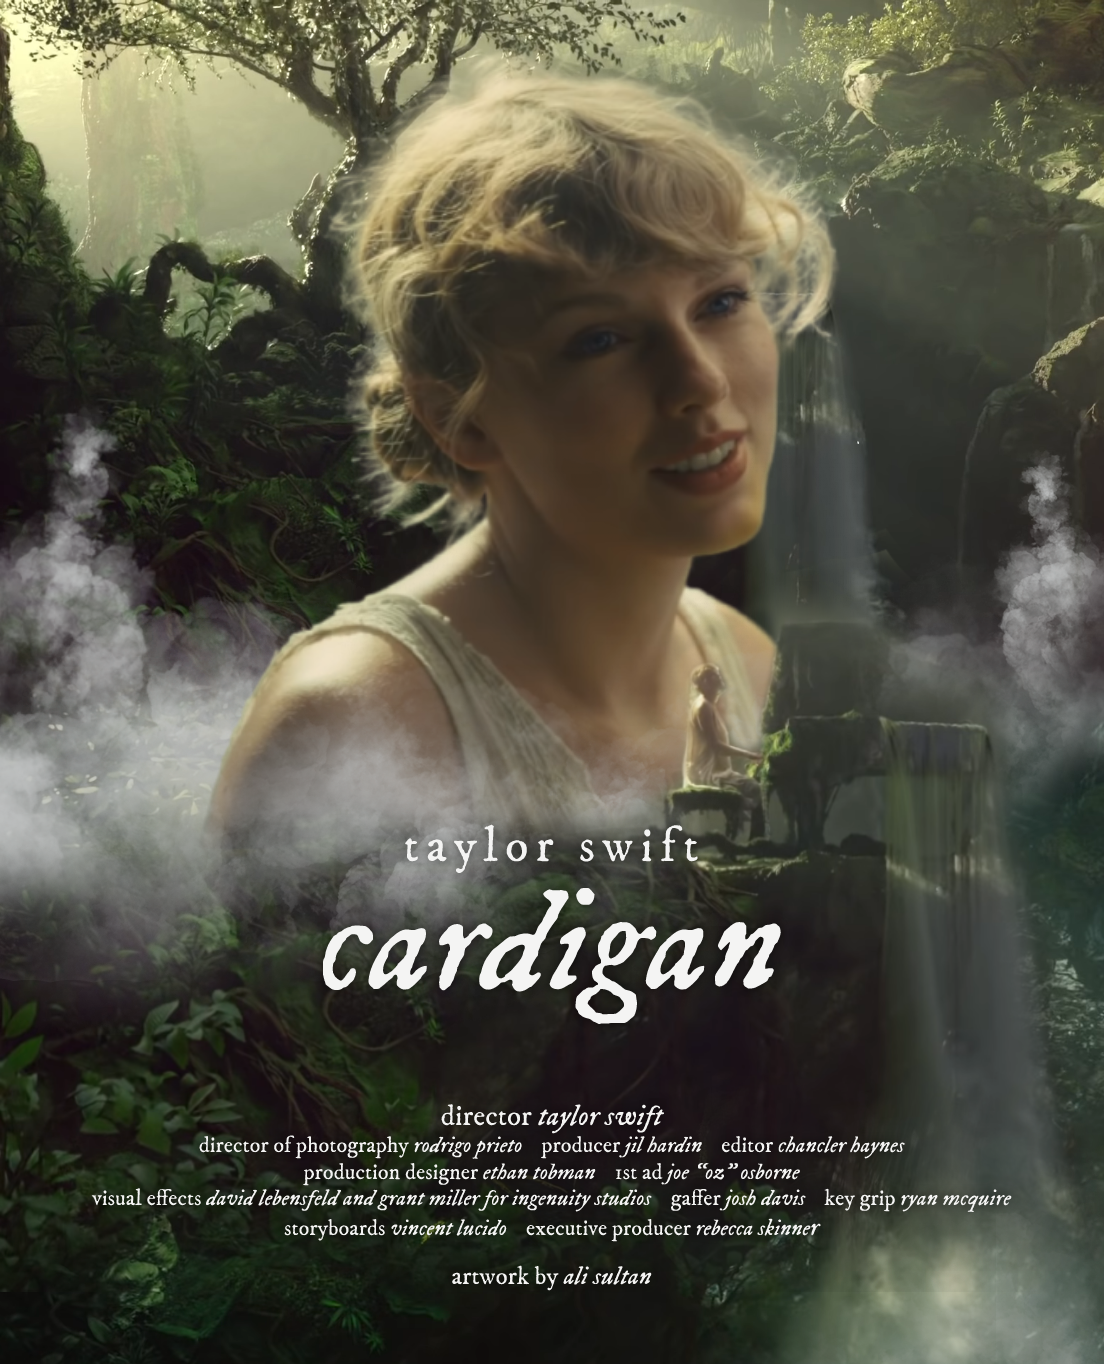 cardigan - Taylor Swift Poster by tylerswiftstyles on DeviantArt